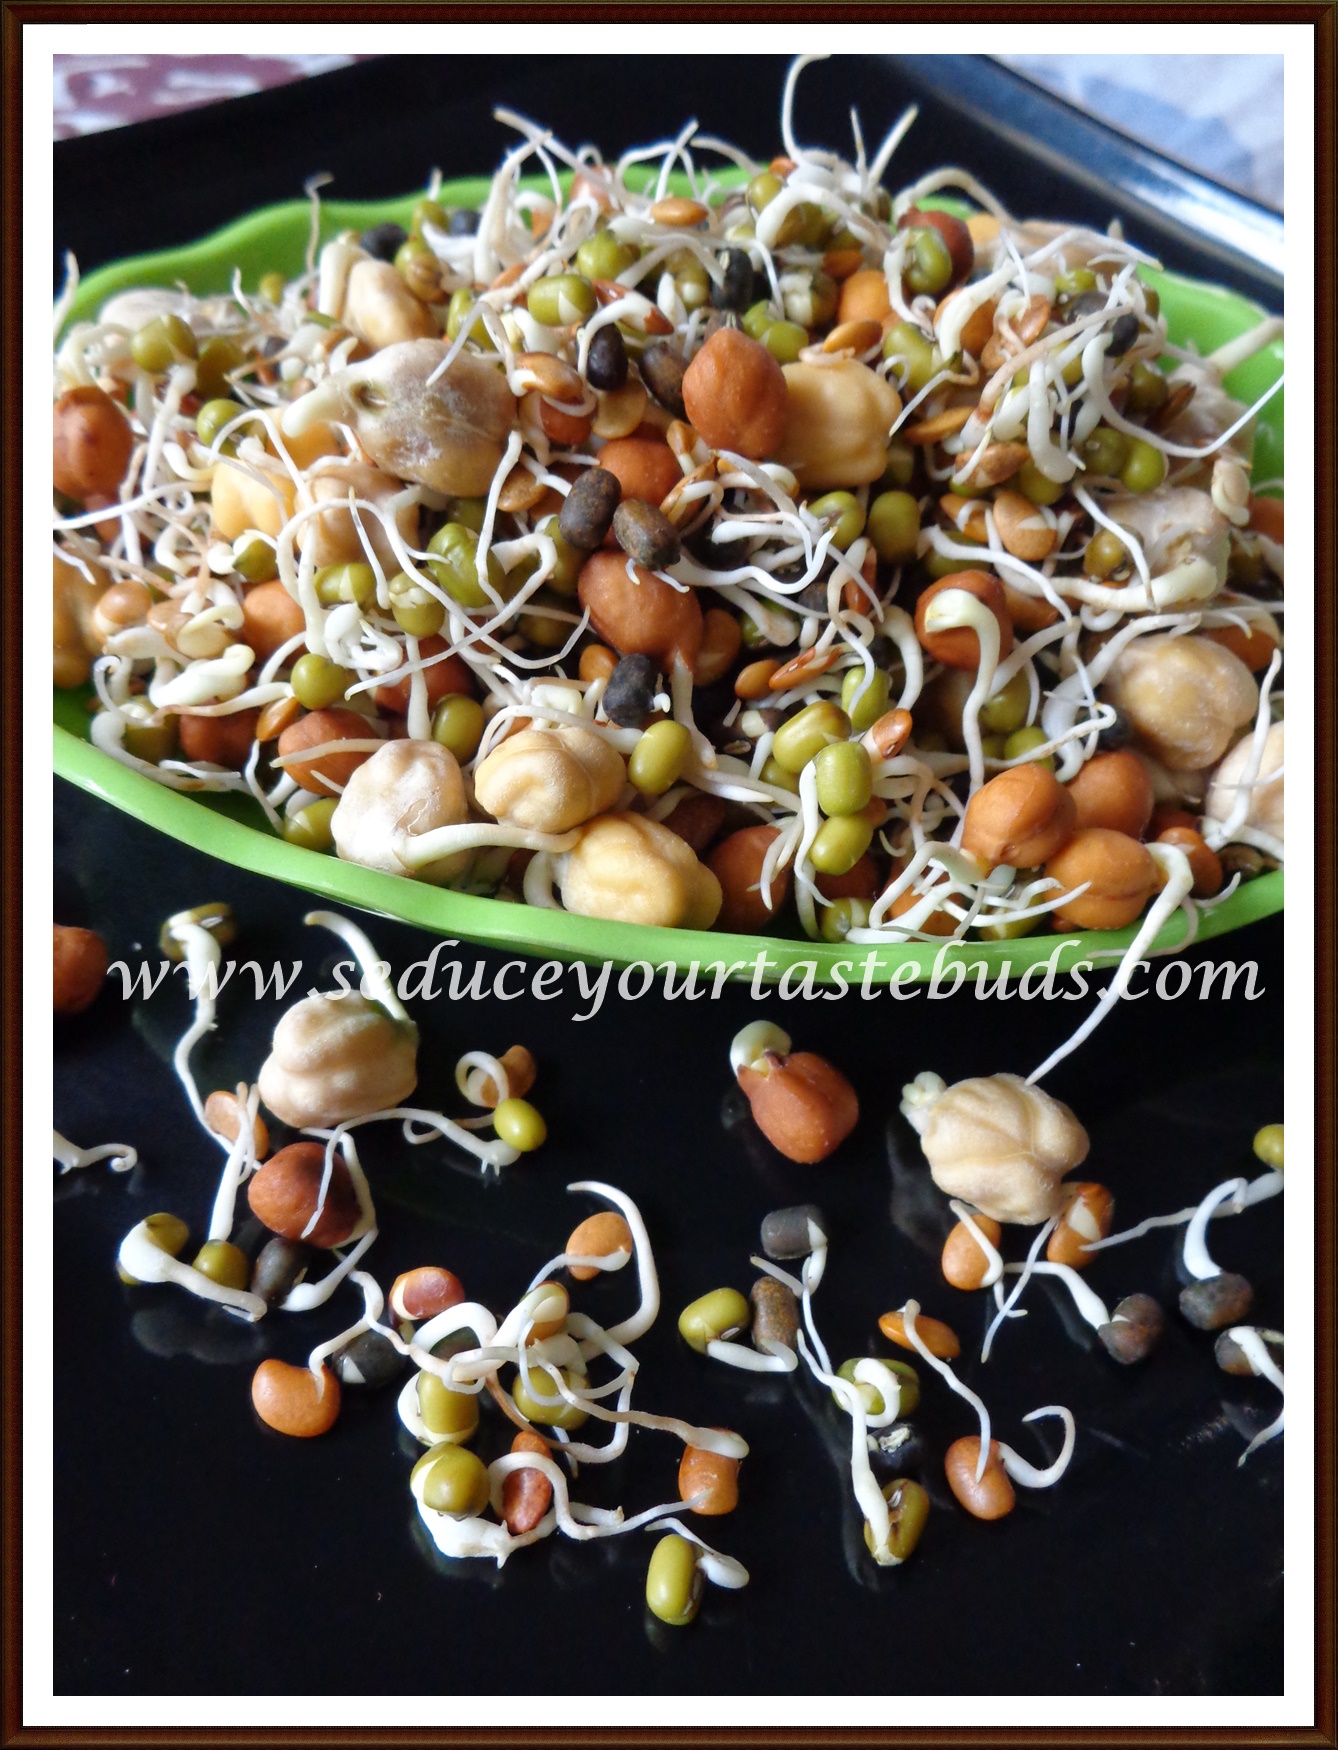 How to Sprout Lentils at Home | Homemade Sprouts